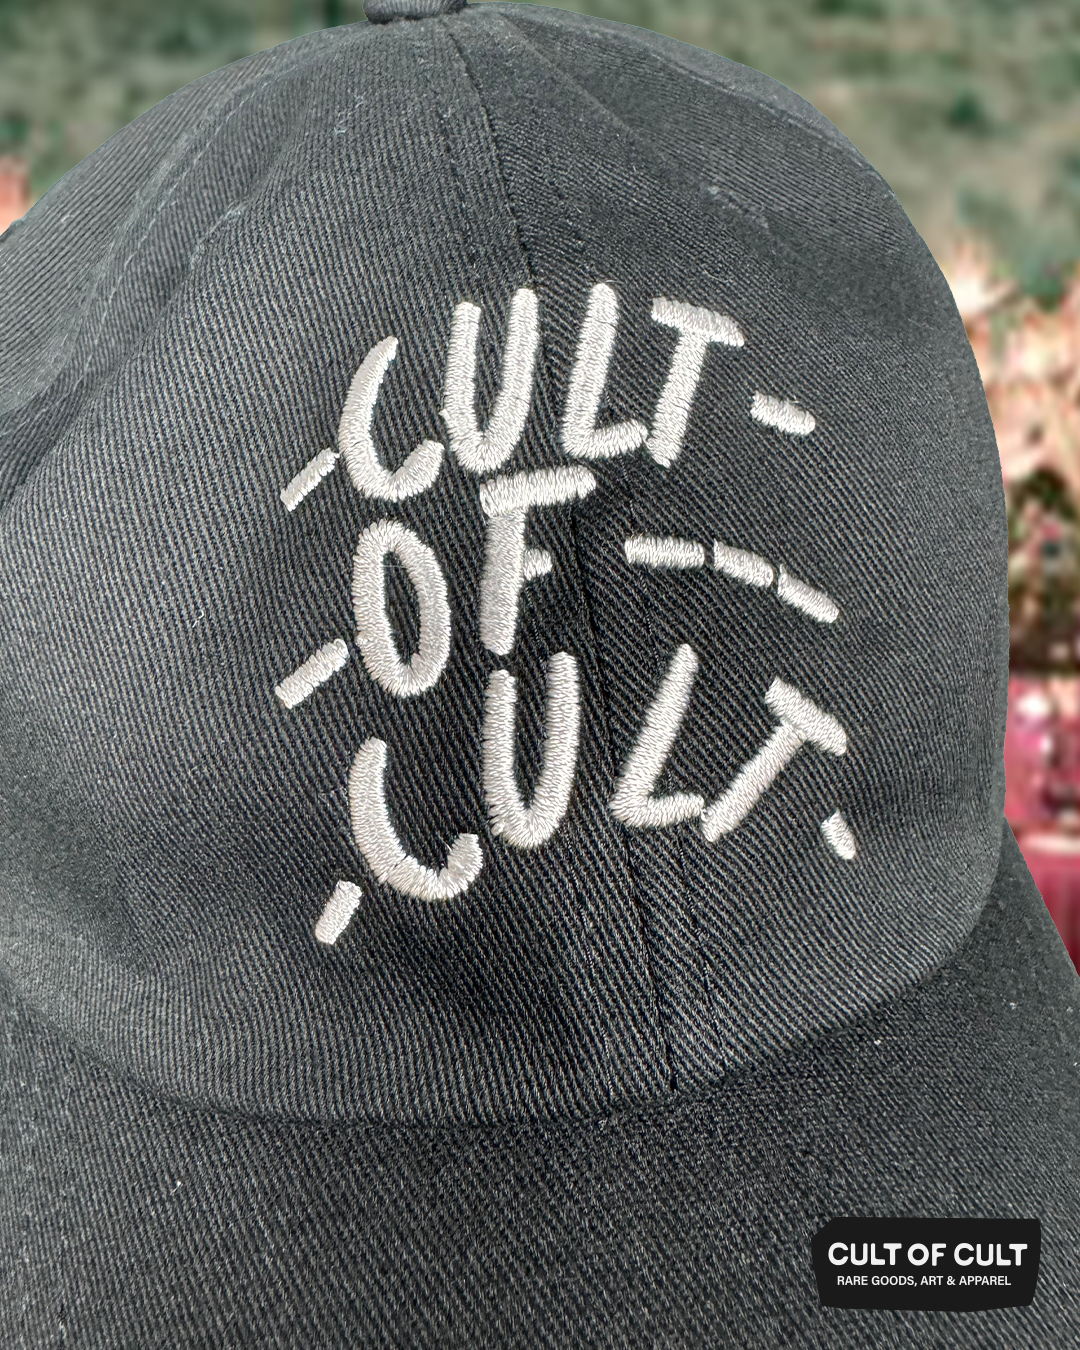 a front close up view of the front of the black Cult of Cult hat